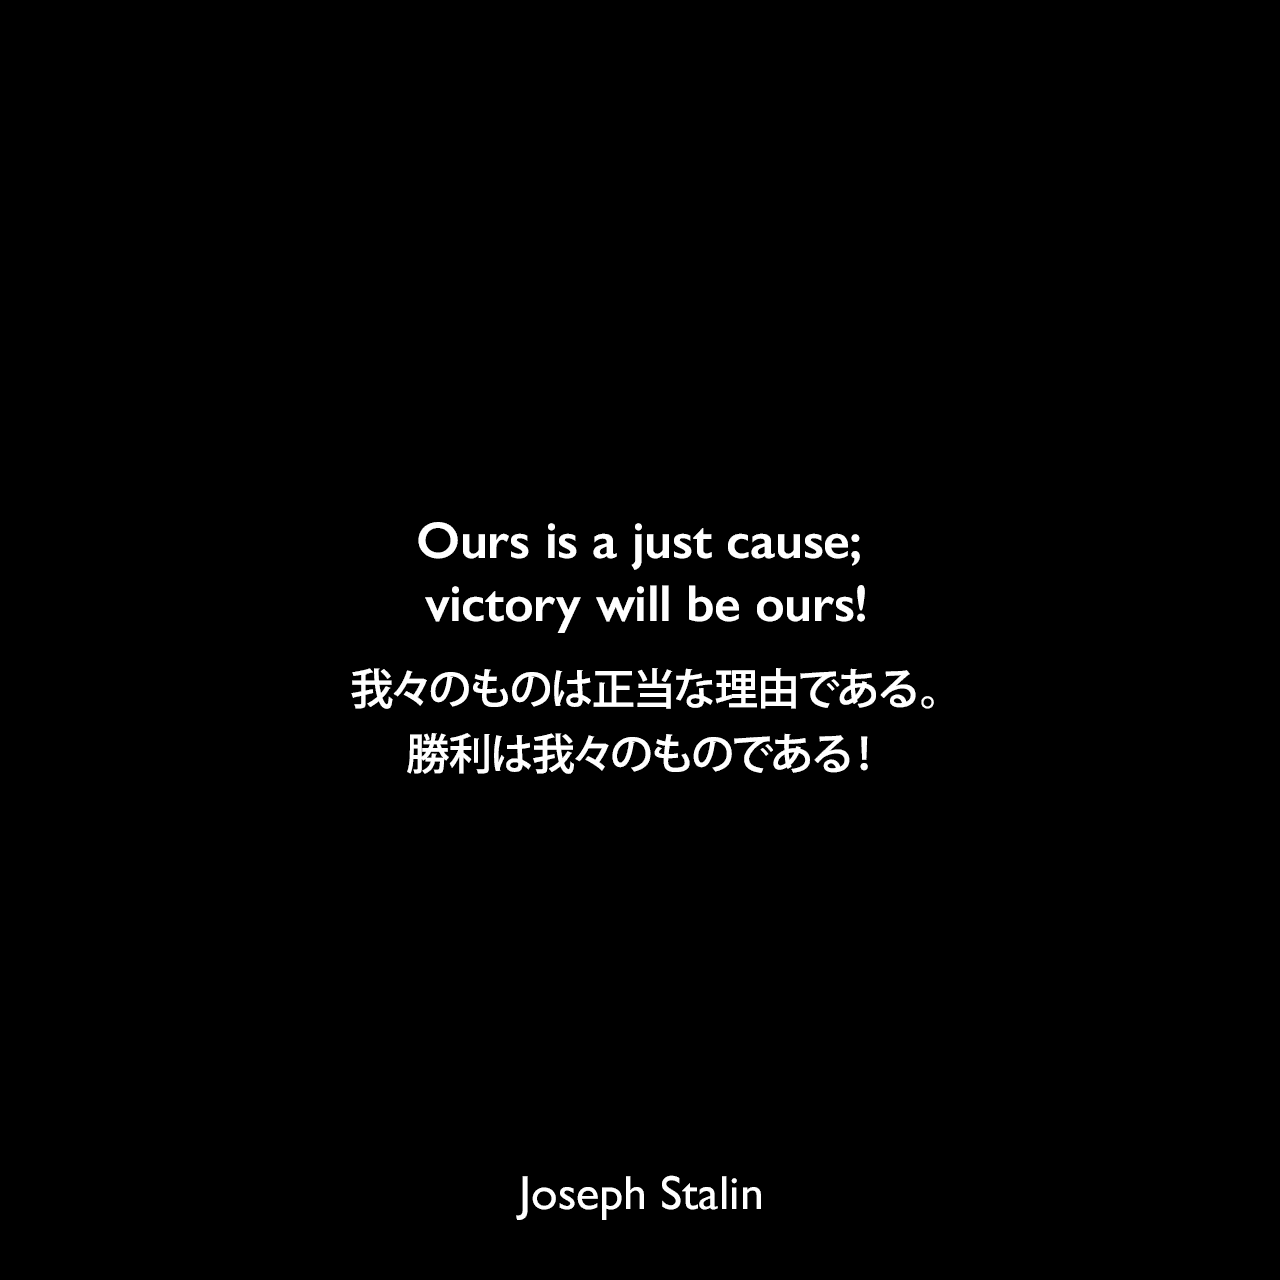 Ours is a just cause; victory will be ours!我々のものは正当な理由である。勝利は我々のものである！- 1941年11月6日祝賀会でのスピーチよりJoseph Stalin